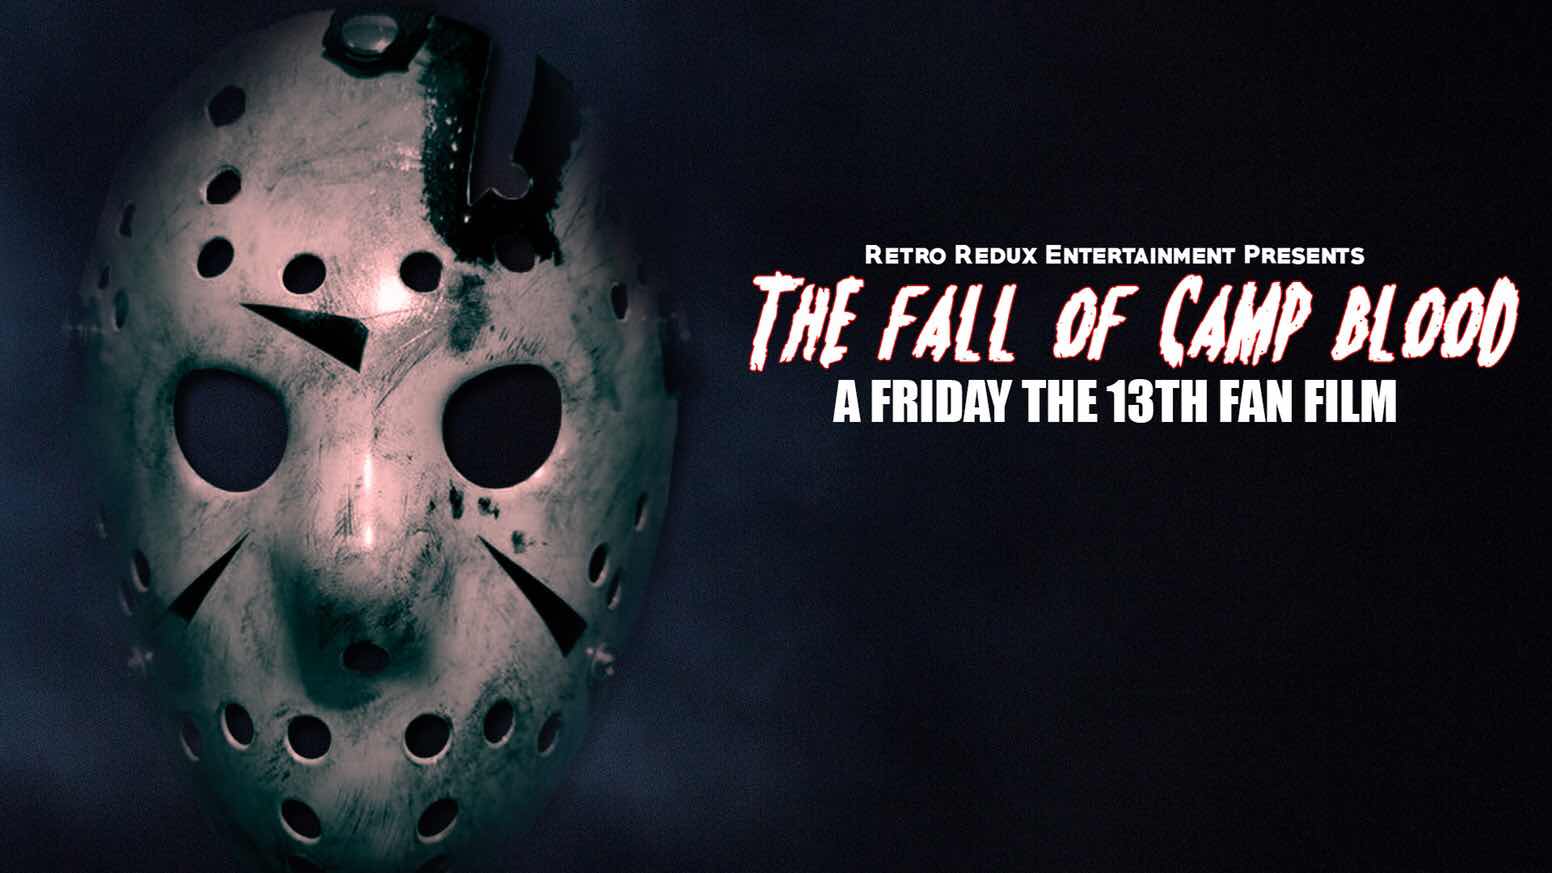 New Trailer For ‘Fall Of Camp Blood’ Friday The 13th Fan Film